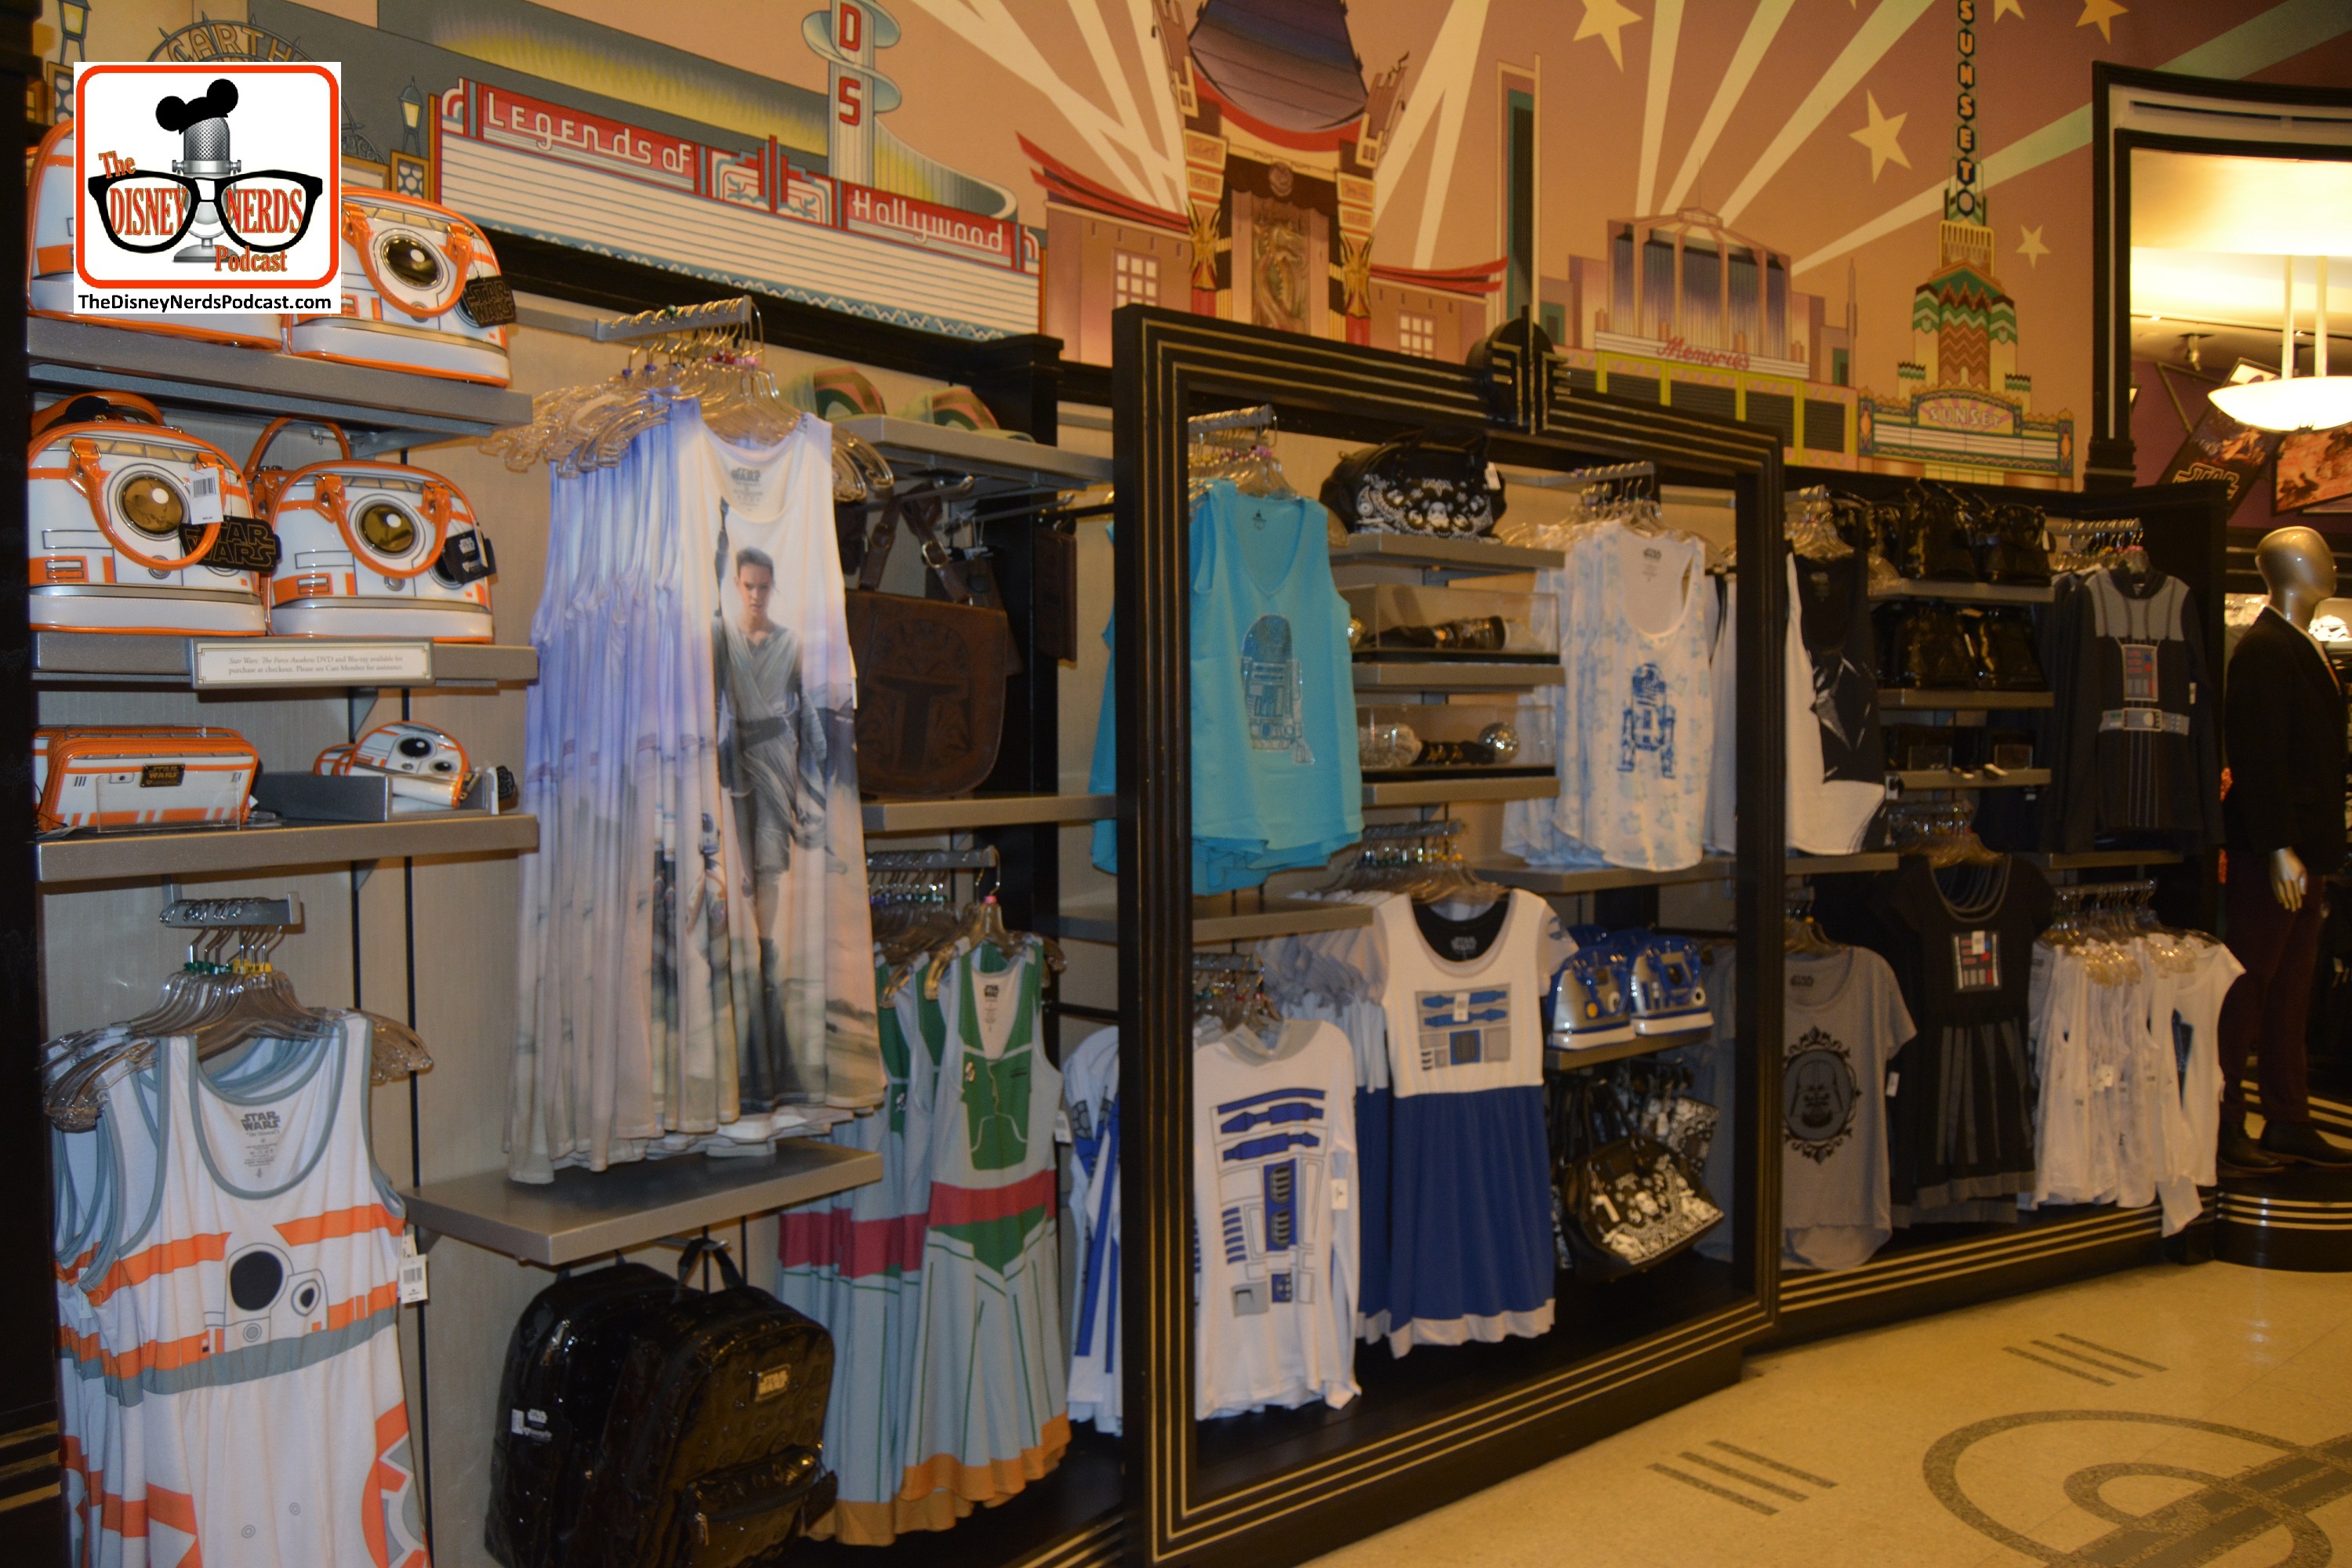 DNP April 2016 Photo Report: The "Everything Frozen" Store is now "Everything Star Wars" but mostly ladies apparel.